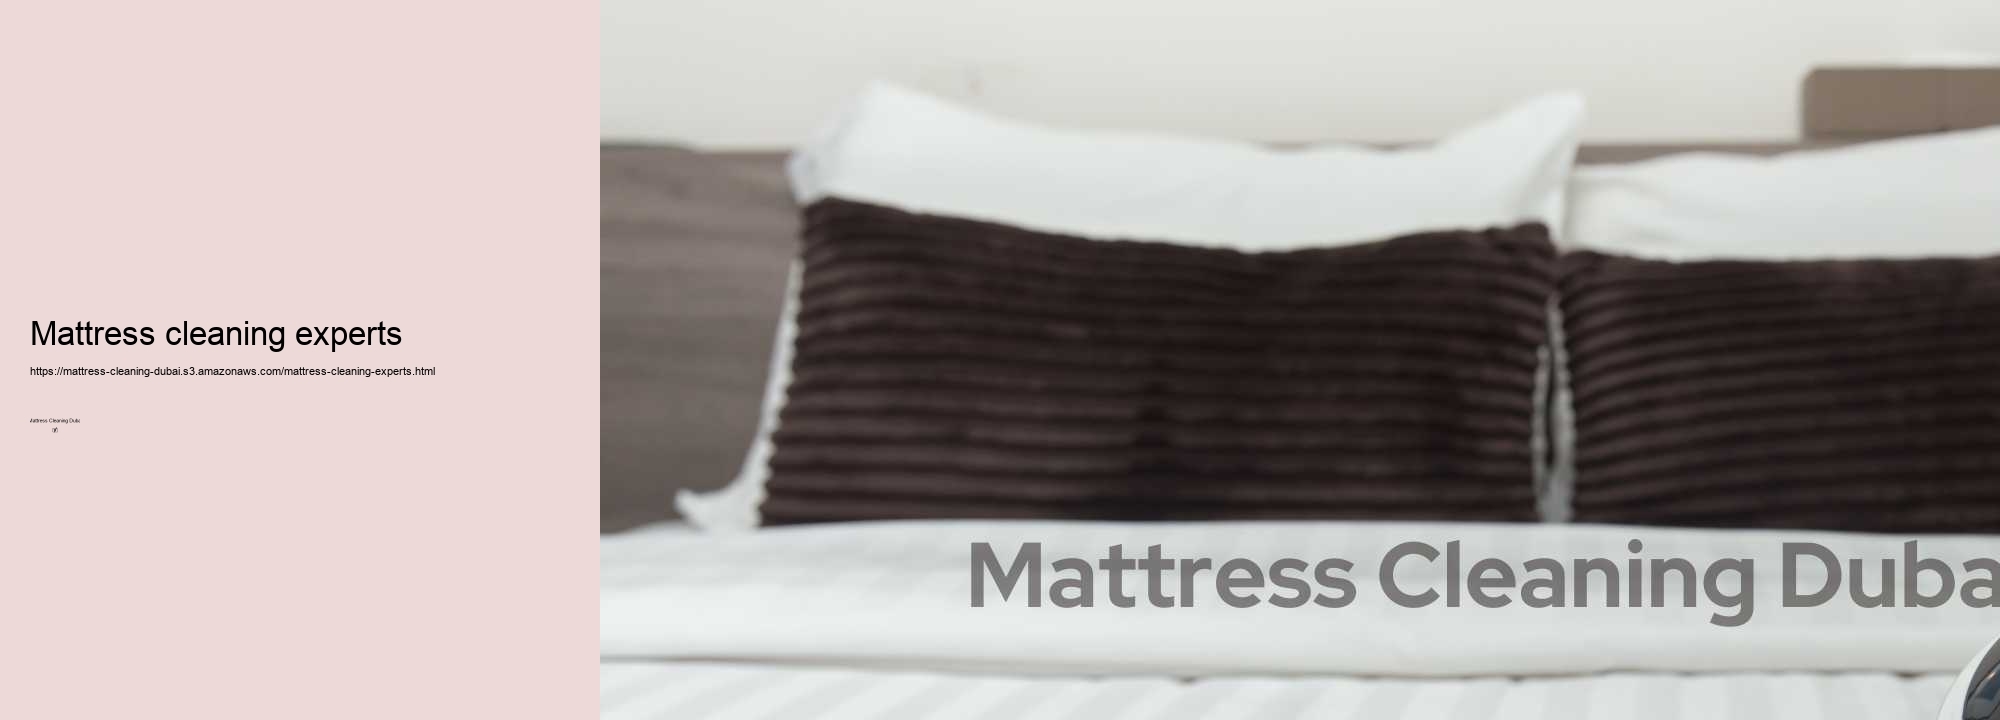 Mattress cleaning experts